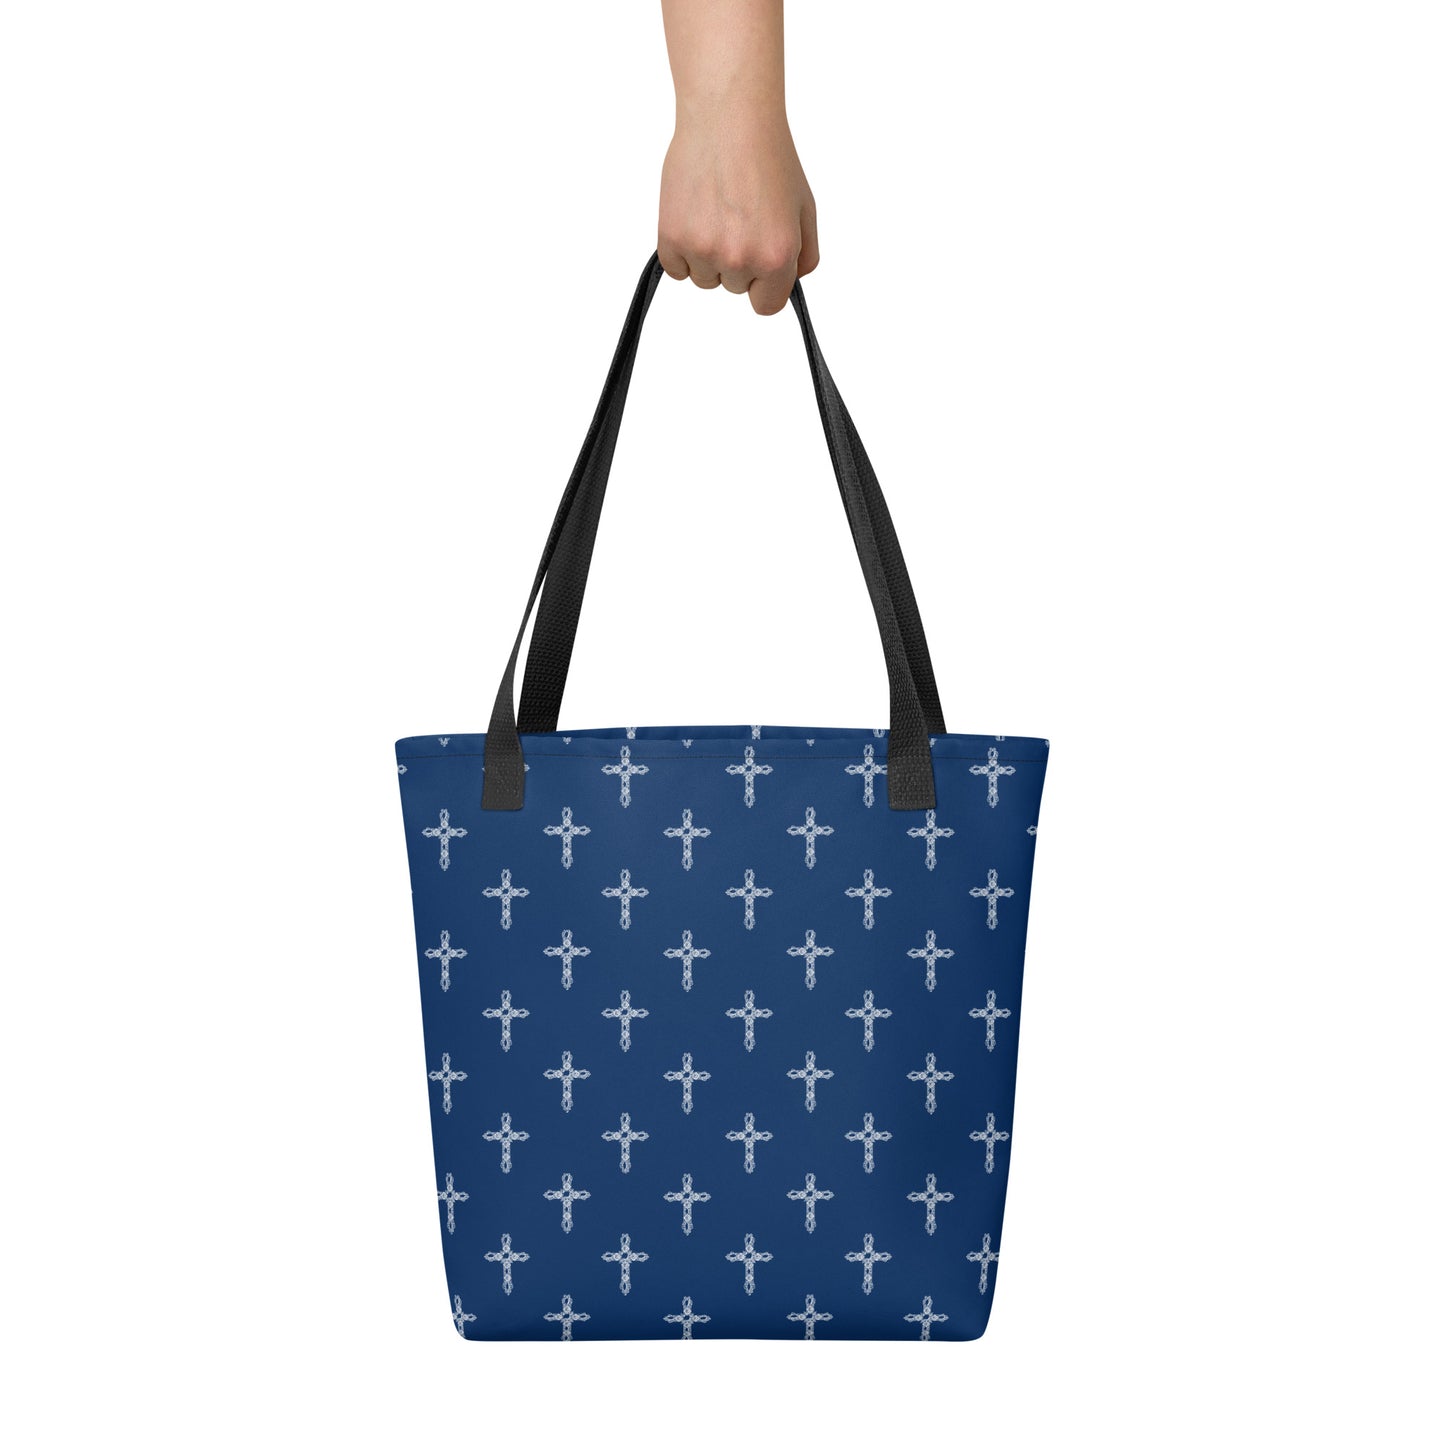 Human hand holding black handles on a navy blue tote bag with white crosses on it.